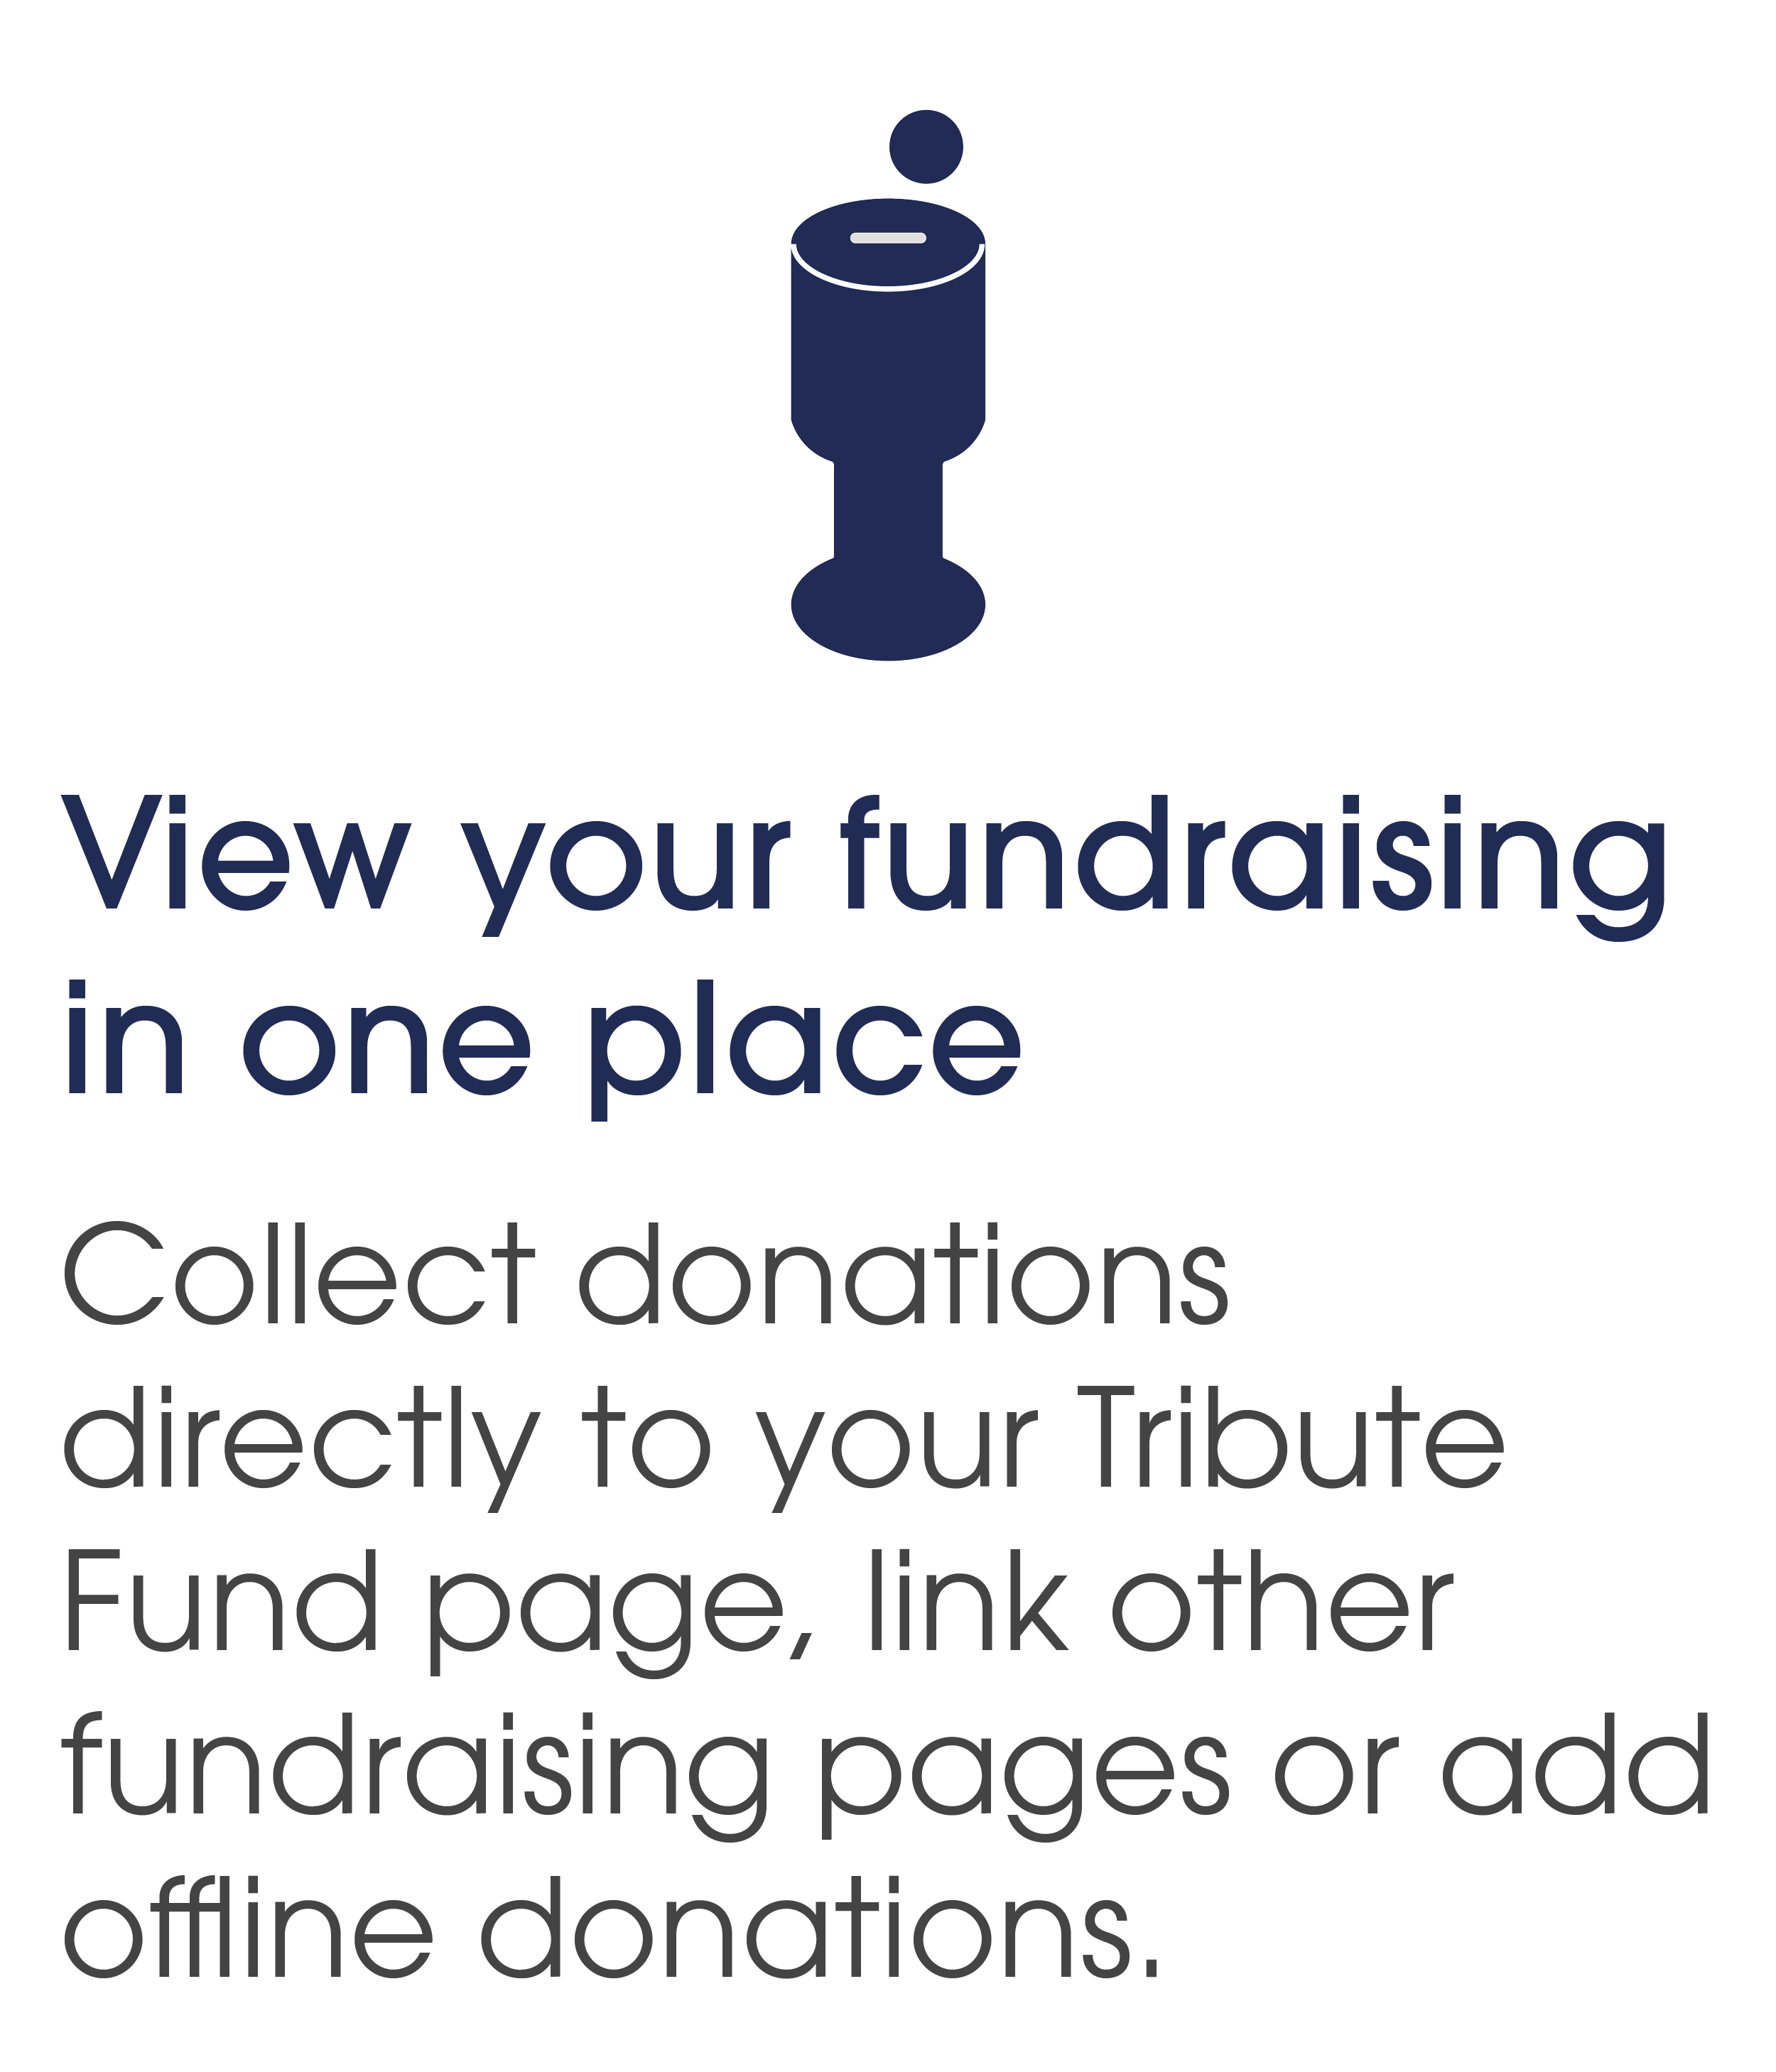 View your fundraising in one place. Collect donations directly to your Tribute Fund page, link other fundraising pages or add offline donations.